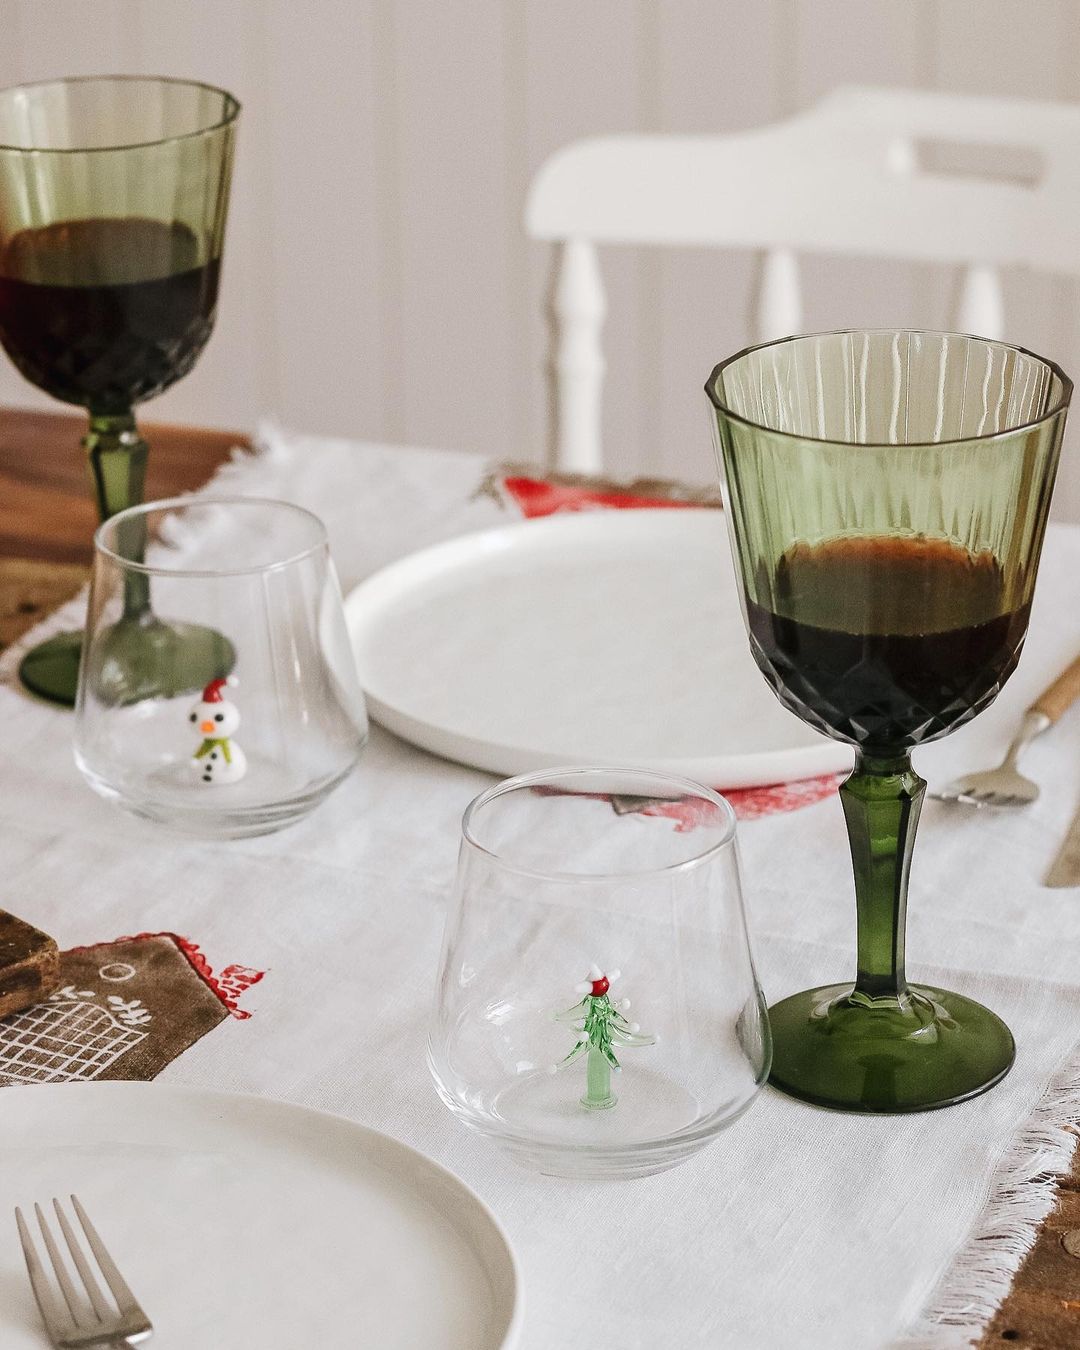 Drinking Glass Set of 2 with Christmas Tree and Snowman Figurines –  MiniZooUSA